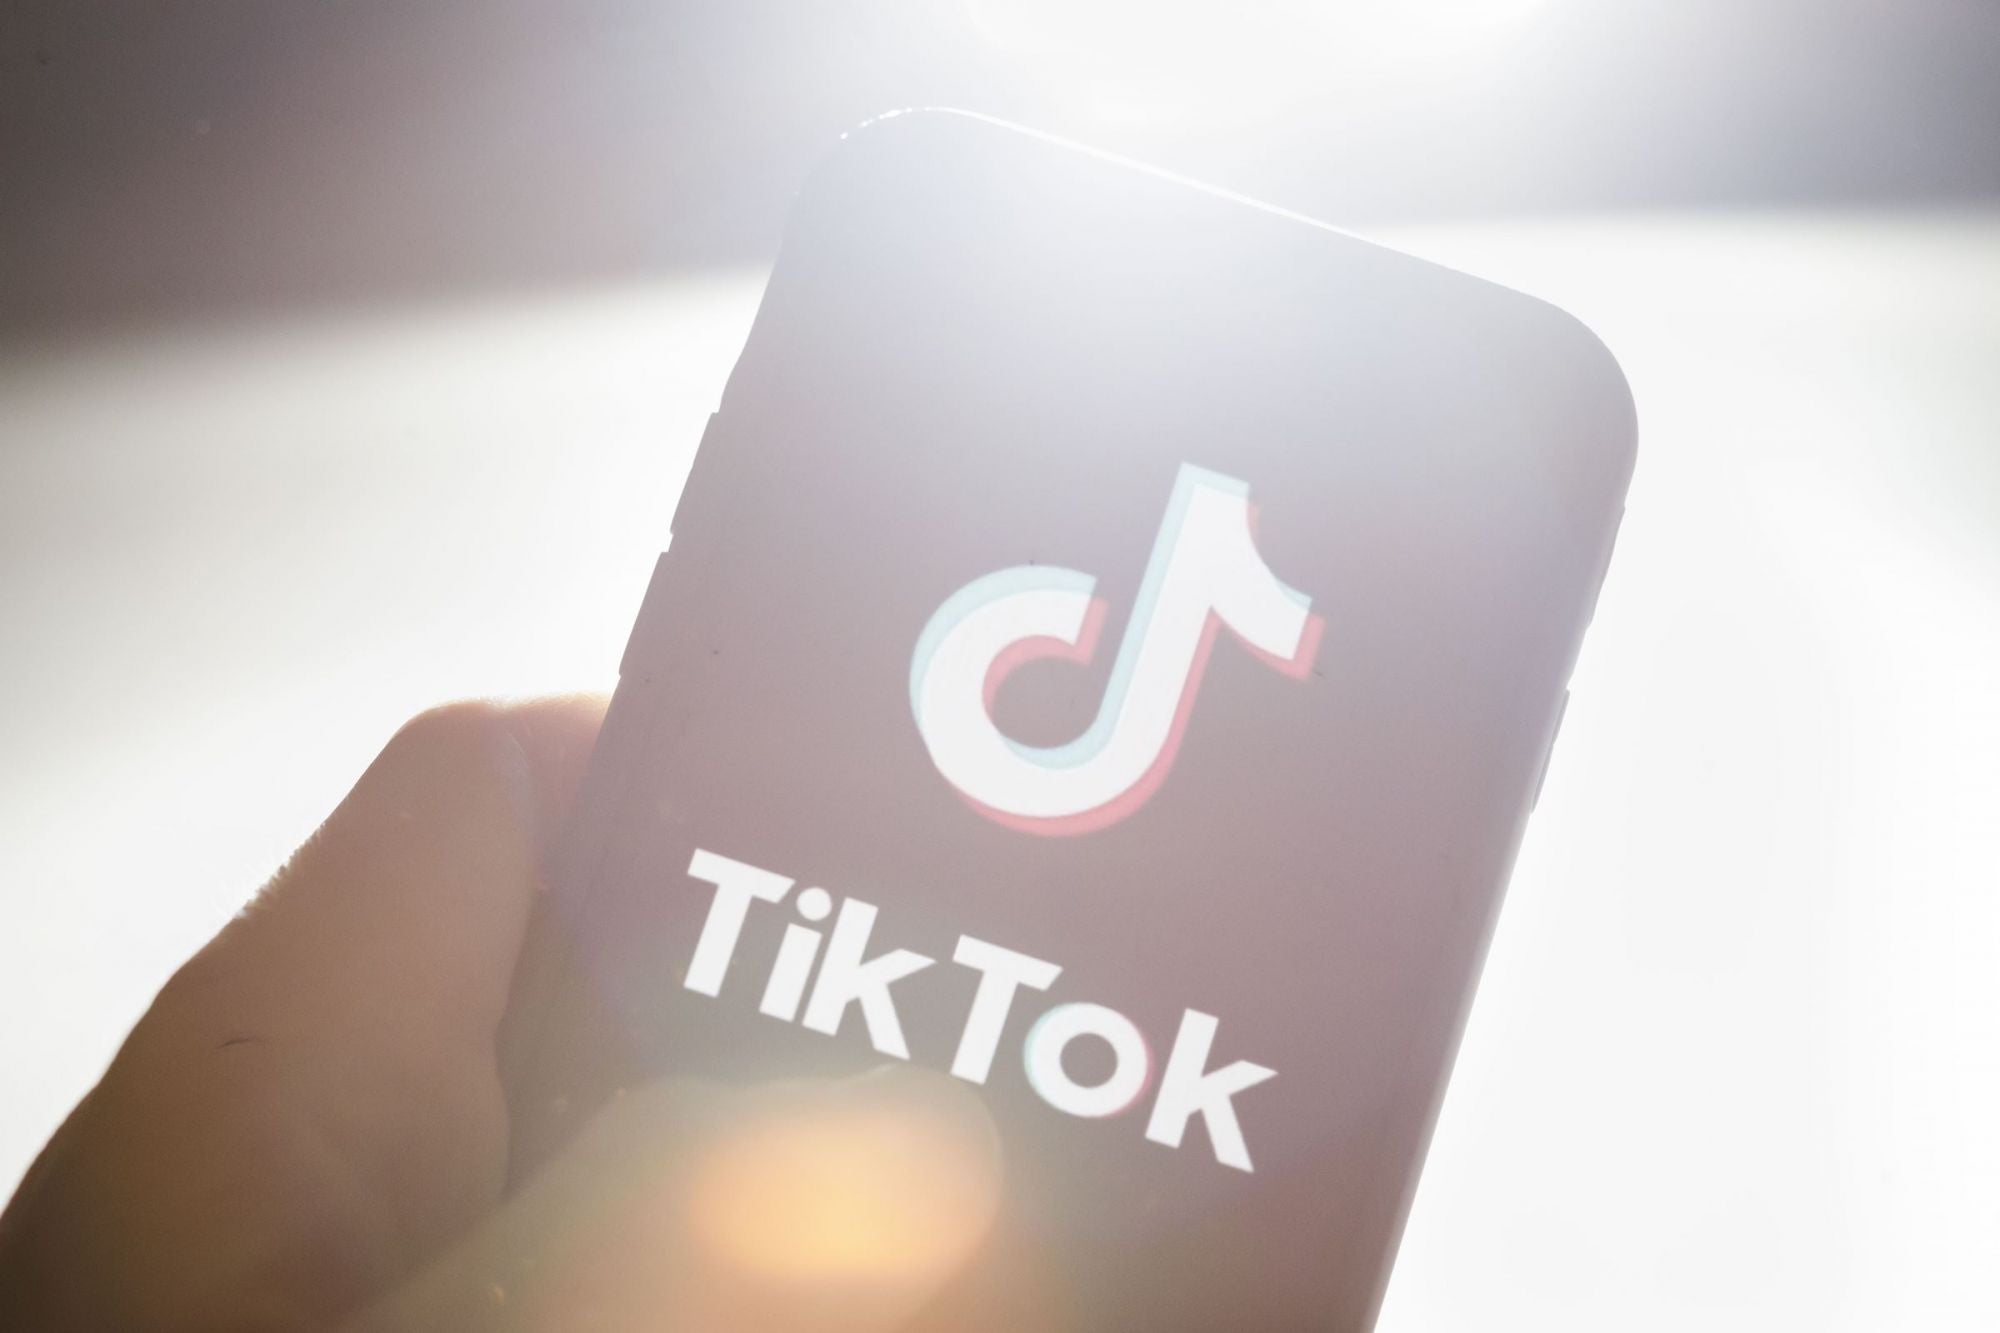 Tiktok for Android and iOS platforms 